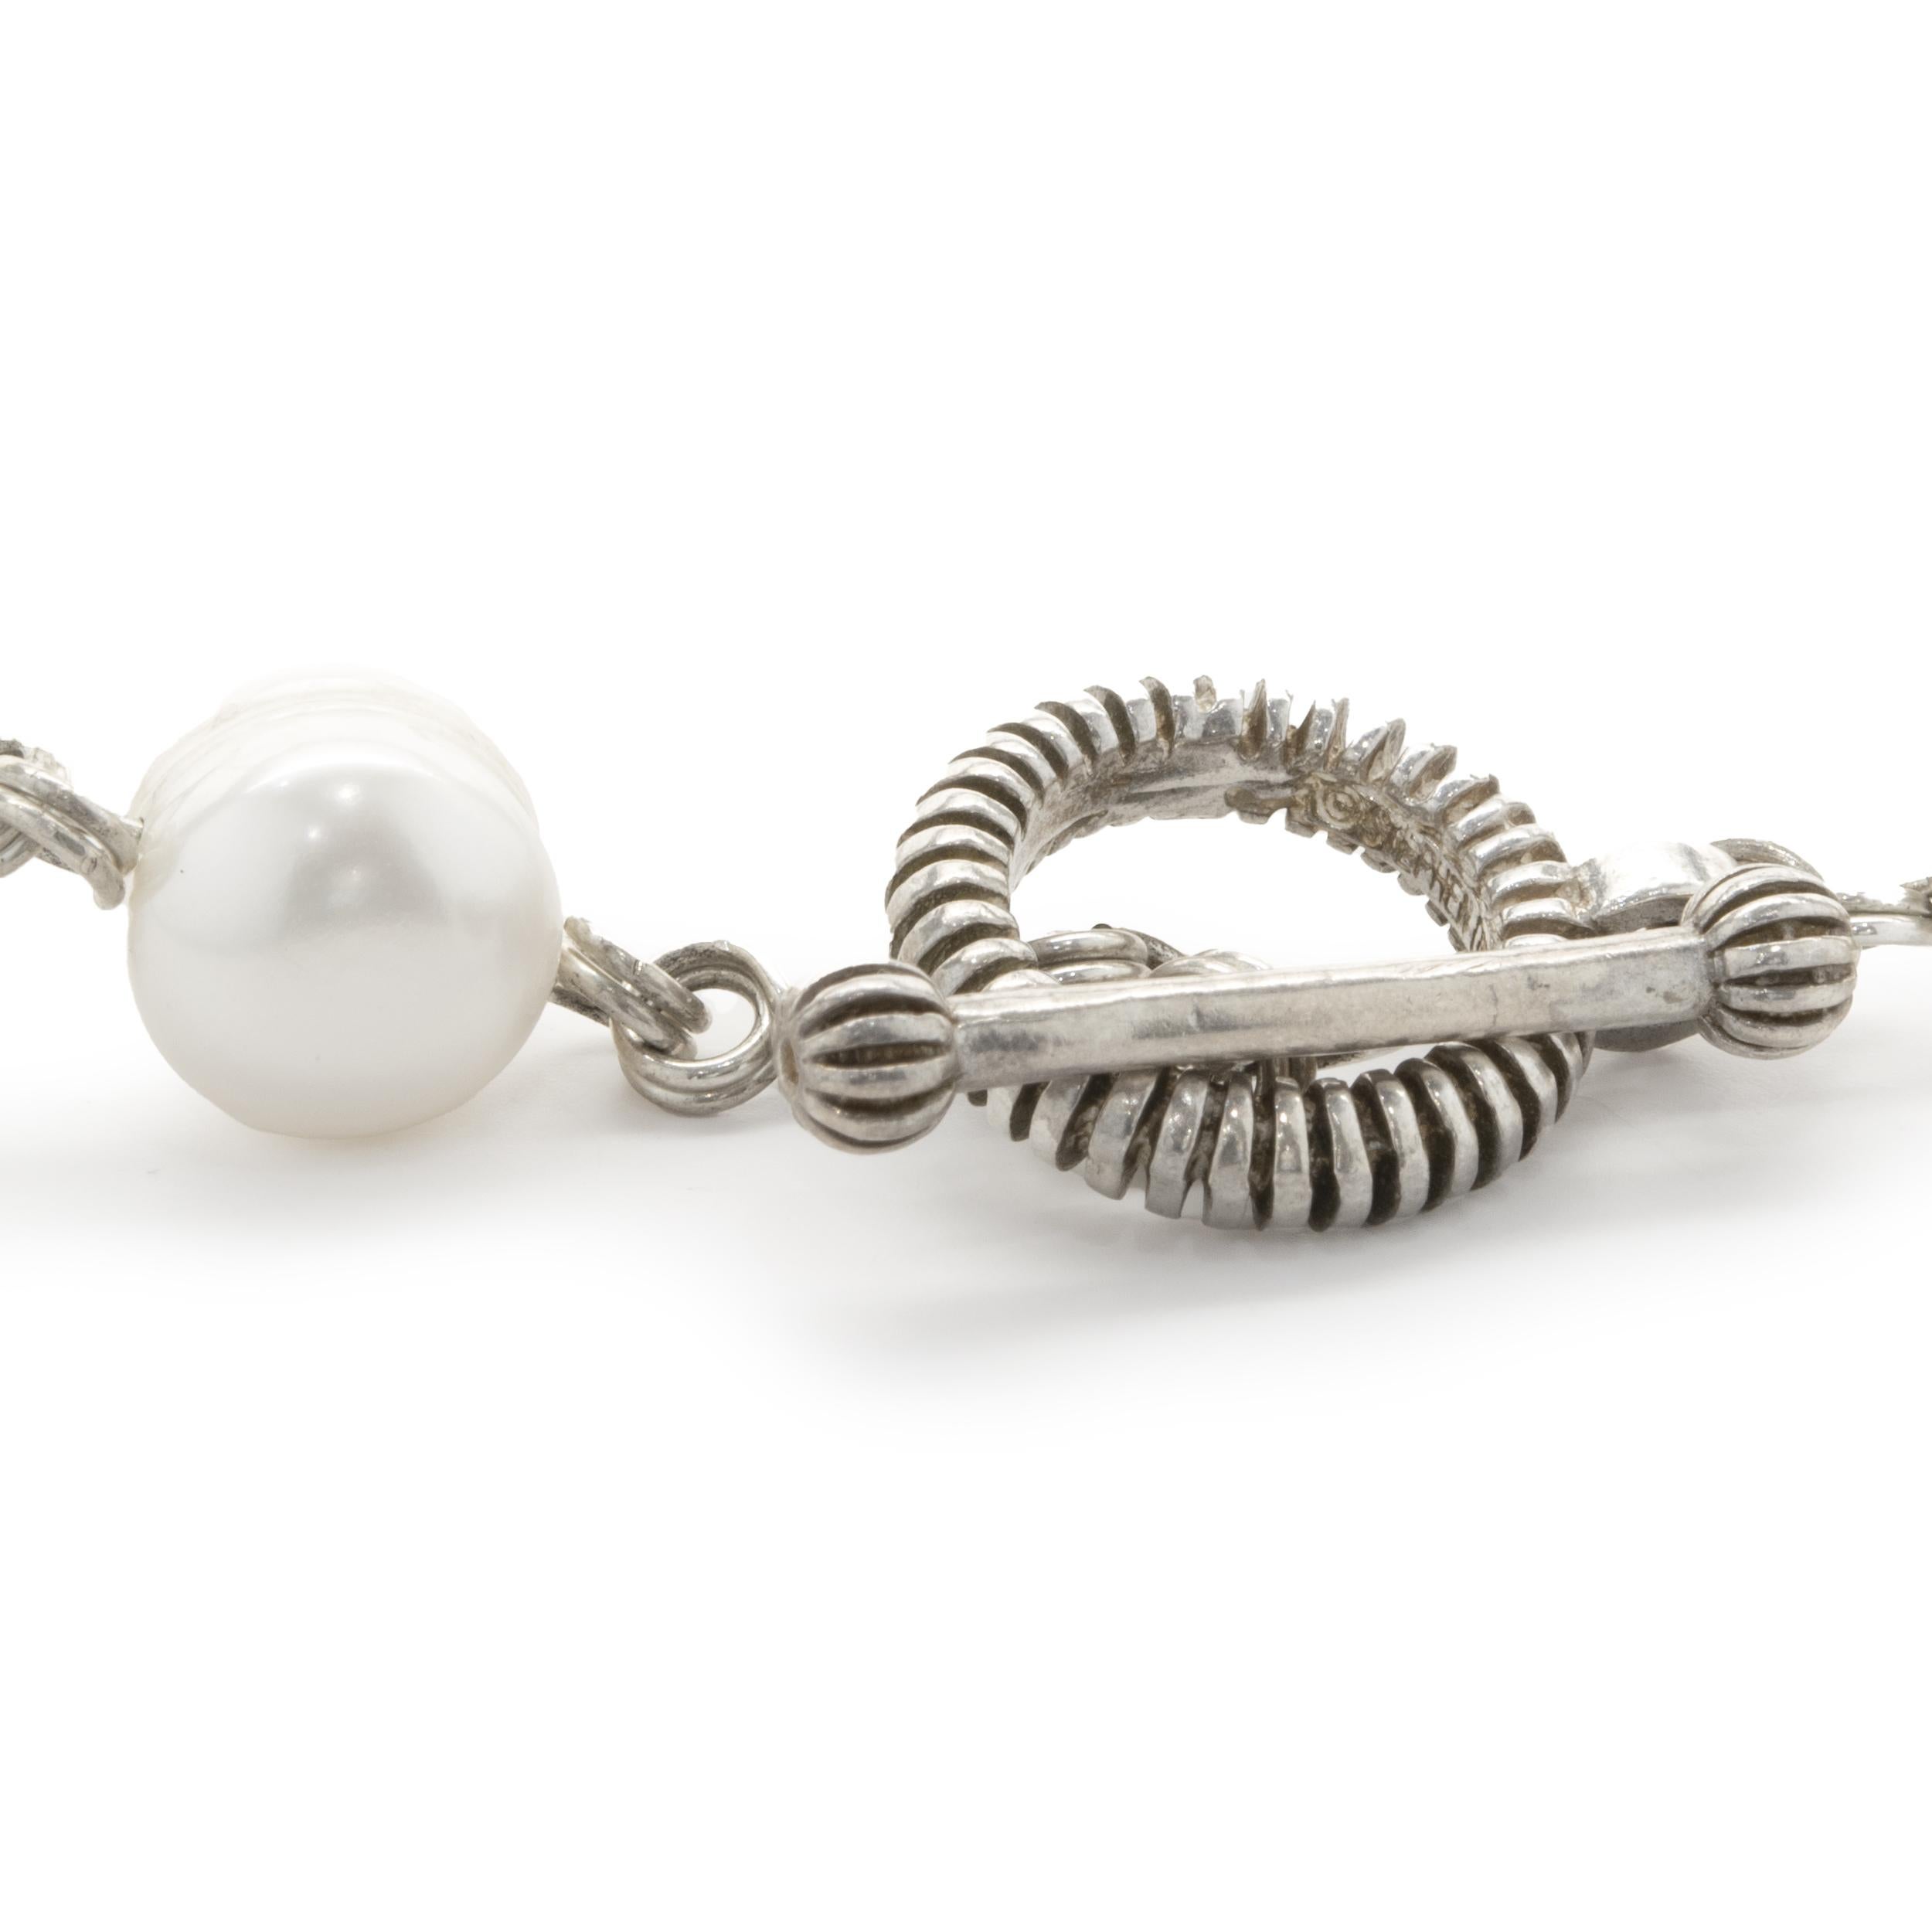 Designer: Stephen Dweck
Material: sterling silver 
Pearls: freshwater pearl stations = 11.80mm-12.75mm
Dimensions: necklace measures 38-inches in length
Weight: 126.19 grams	
